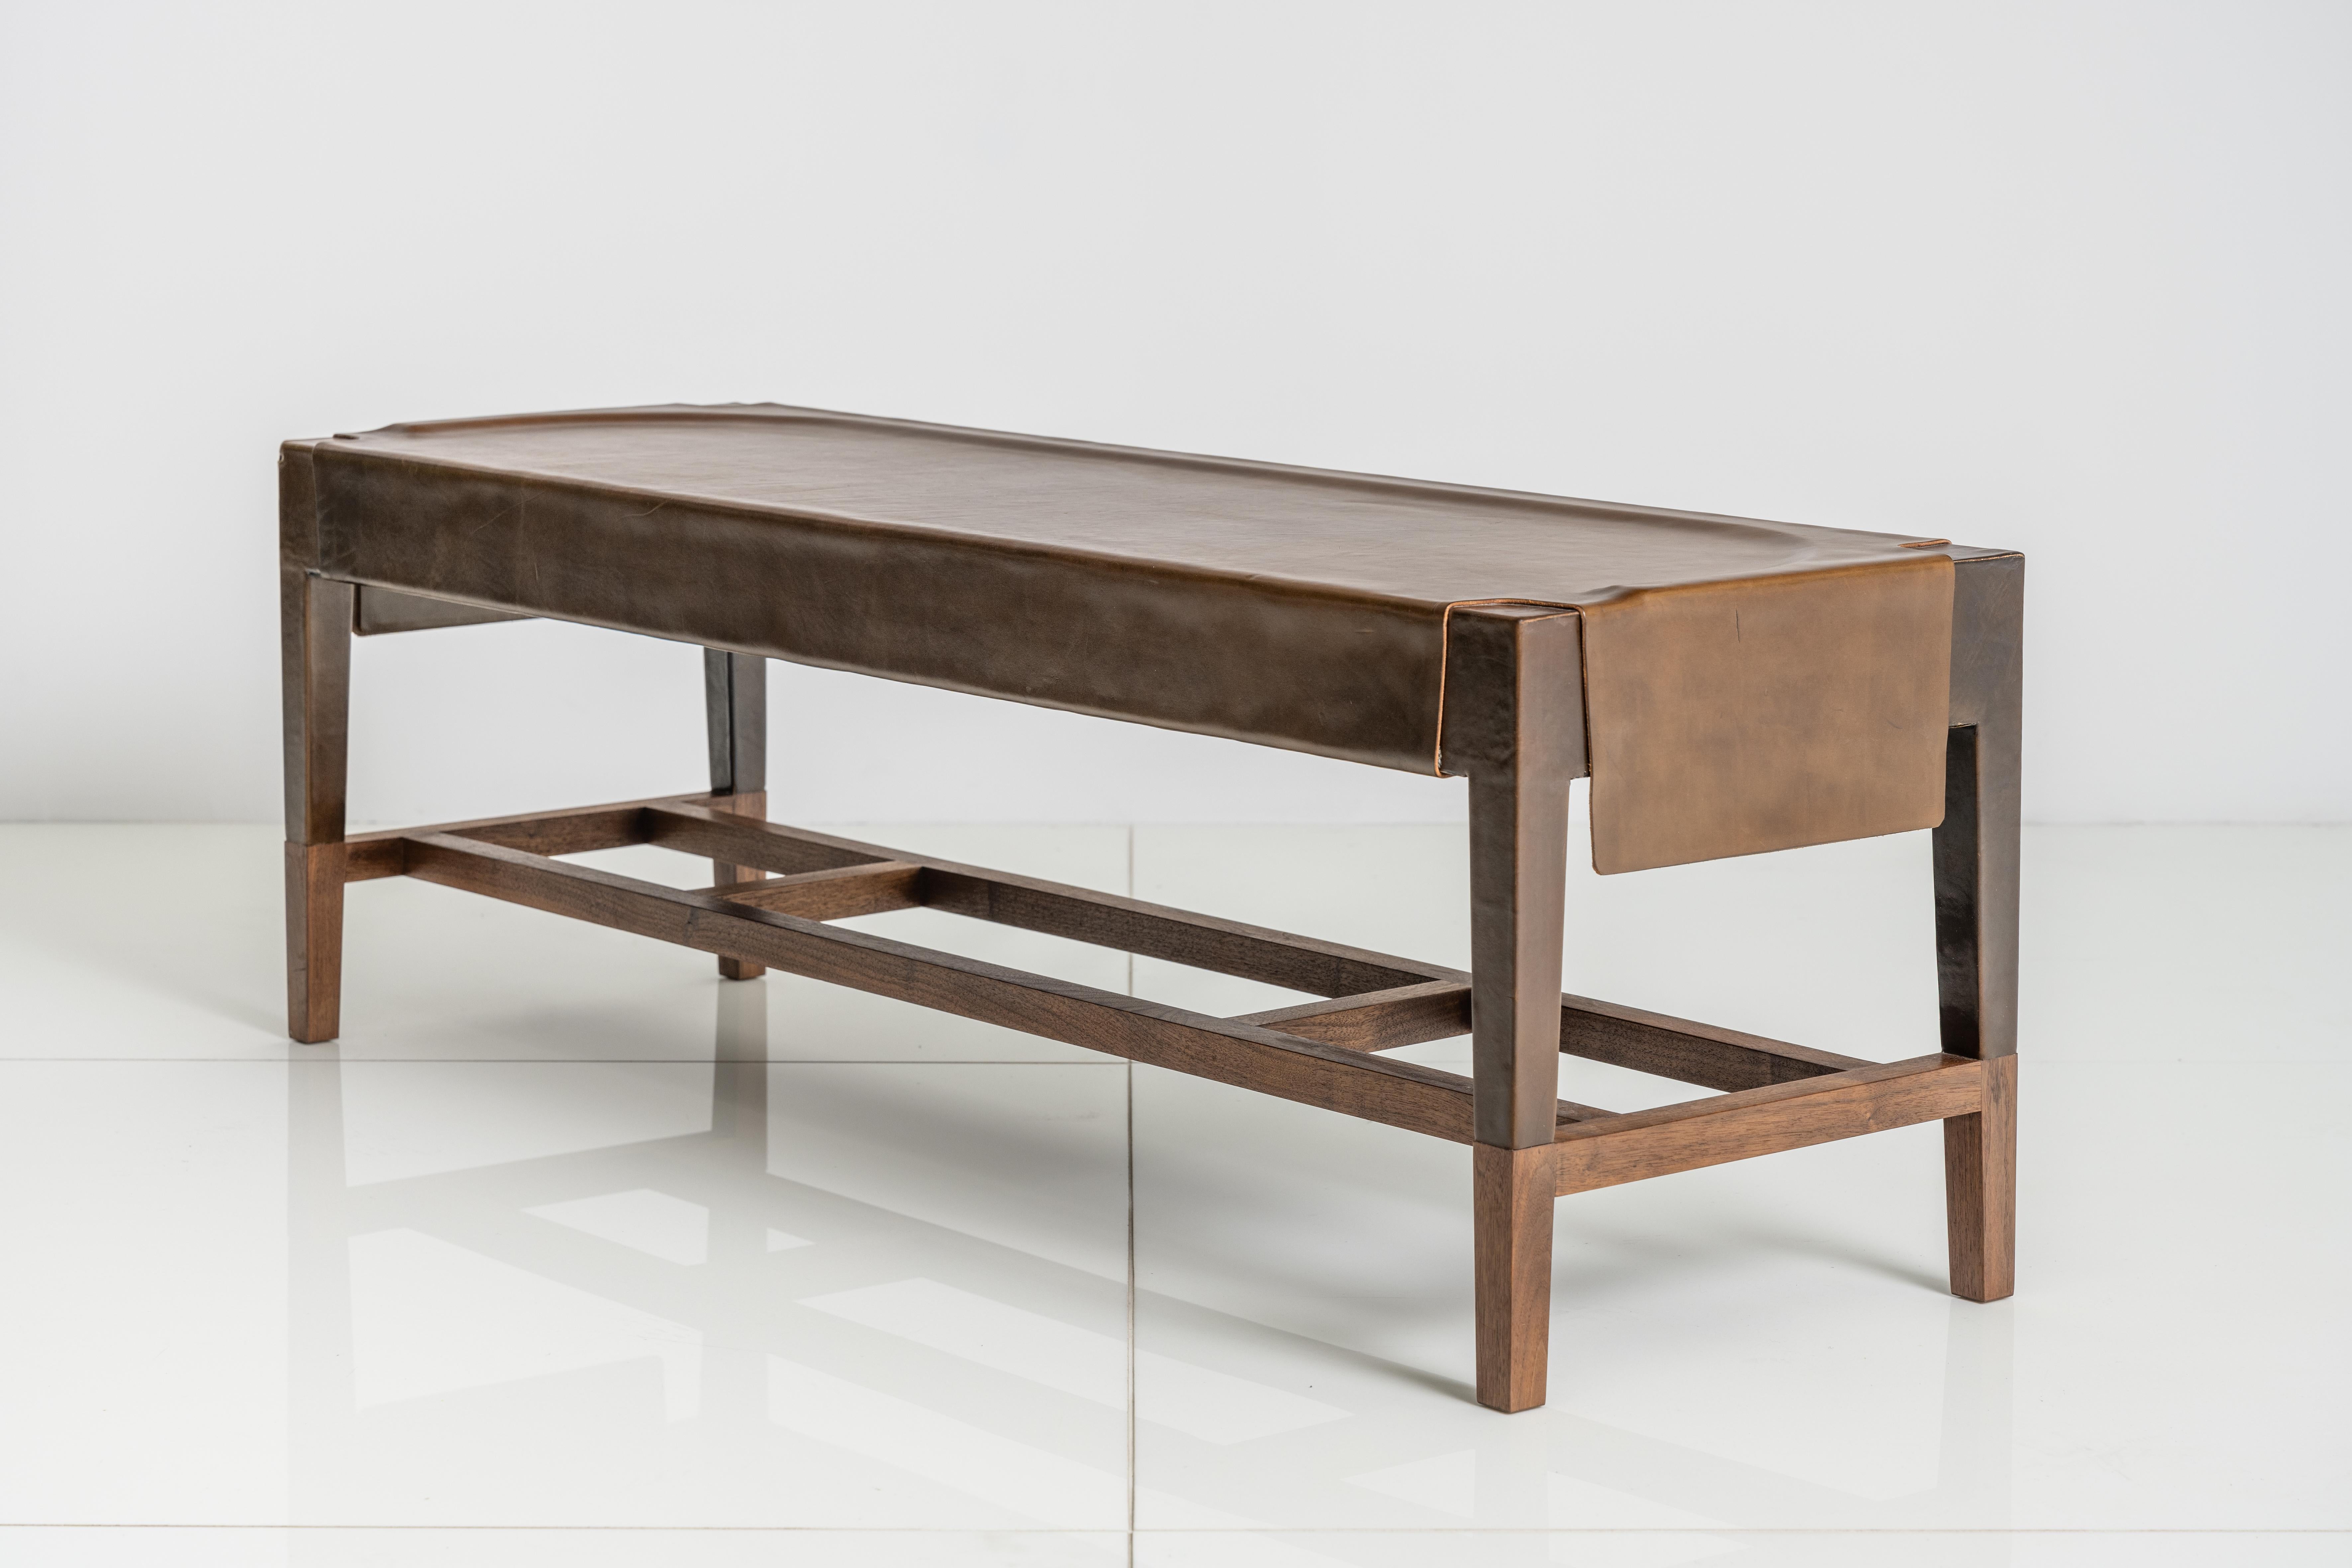 The centuries old process of forming water saturated leather hide over a wood frame forms the essence of the Cassius Bench, which is then exposed at the base to reveal co-planar, walnut legs.

This is a natural product that may have slight